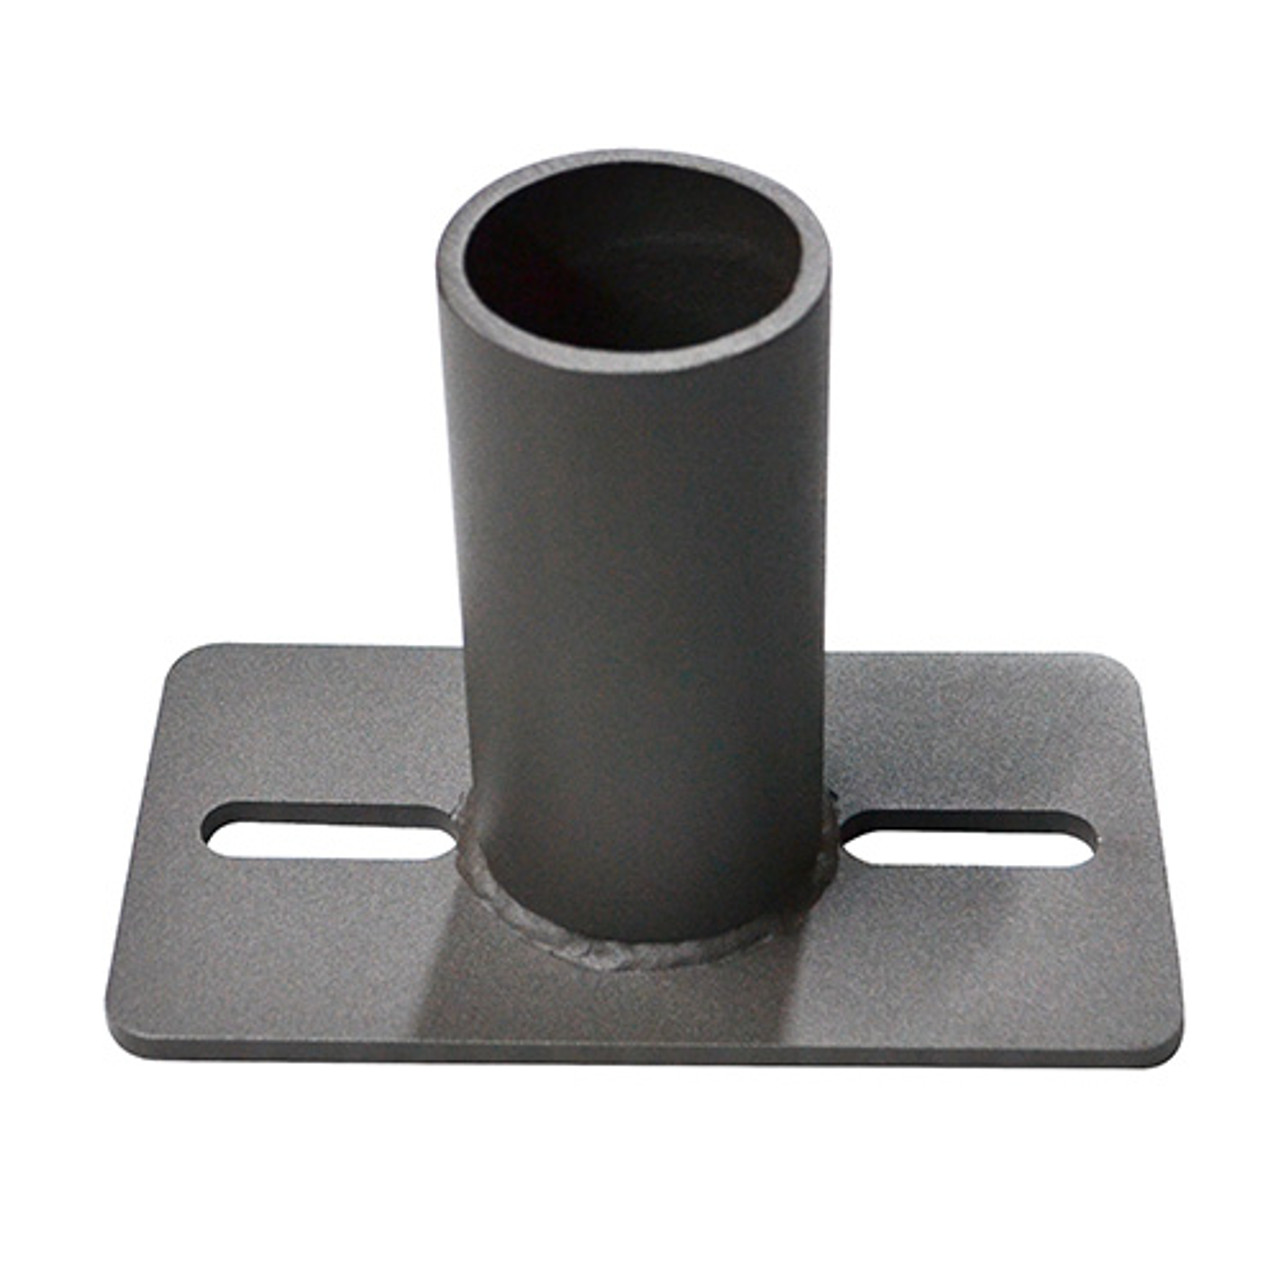 Mount - Square Pole Mounting Pipe Size 2-3/8"